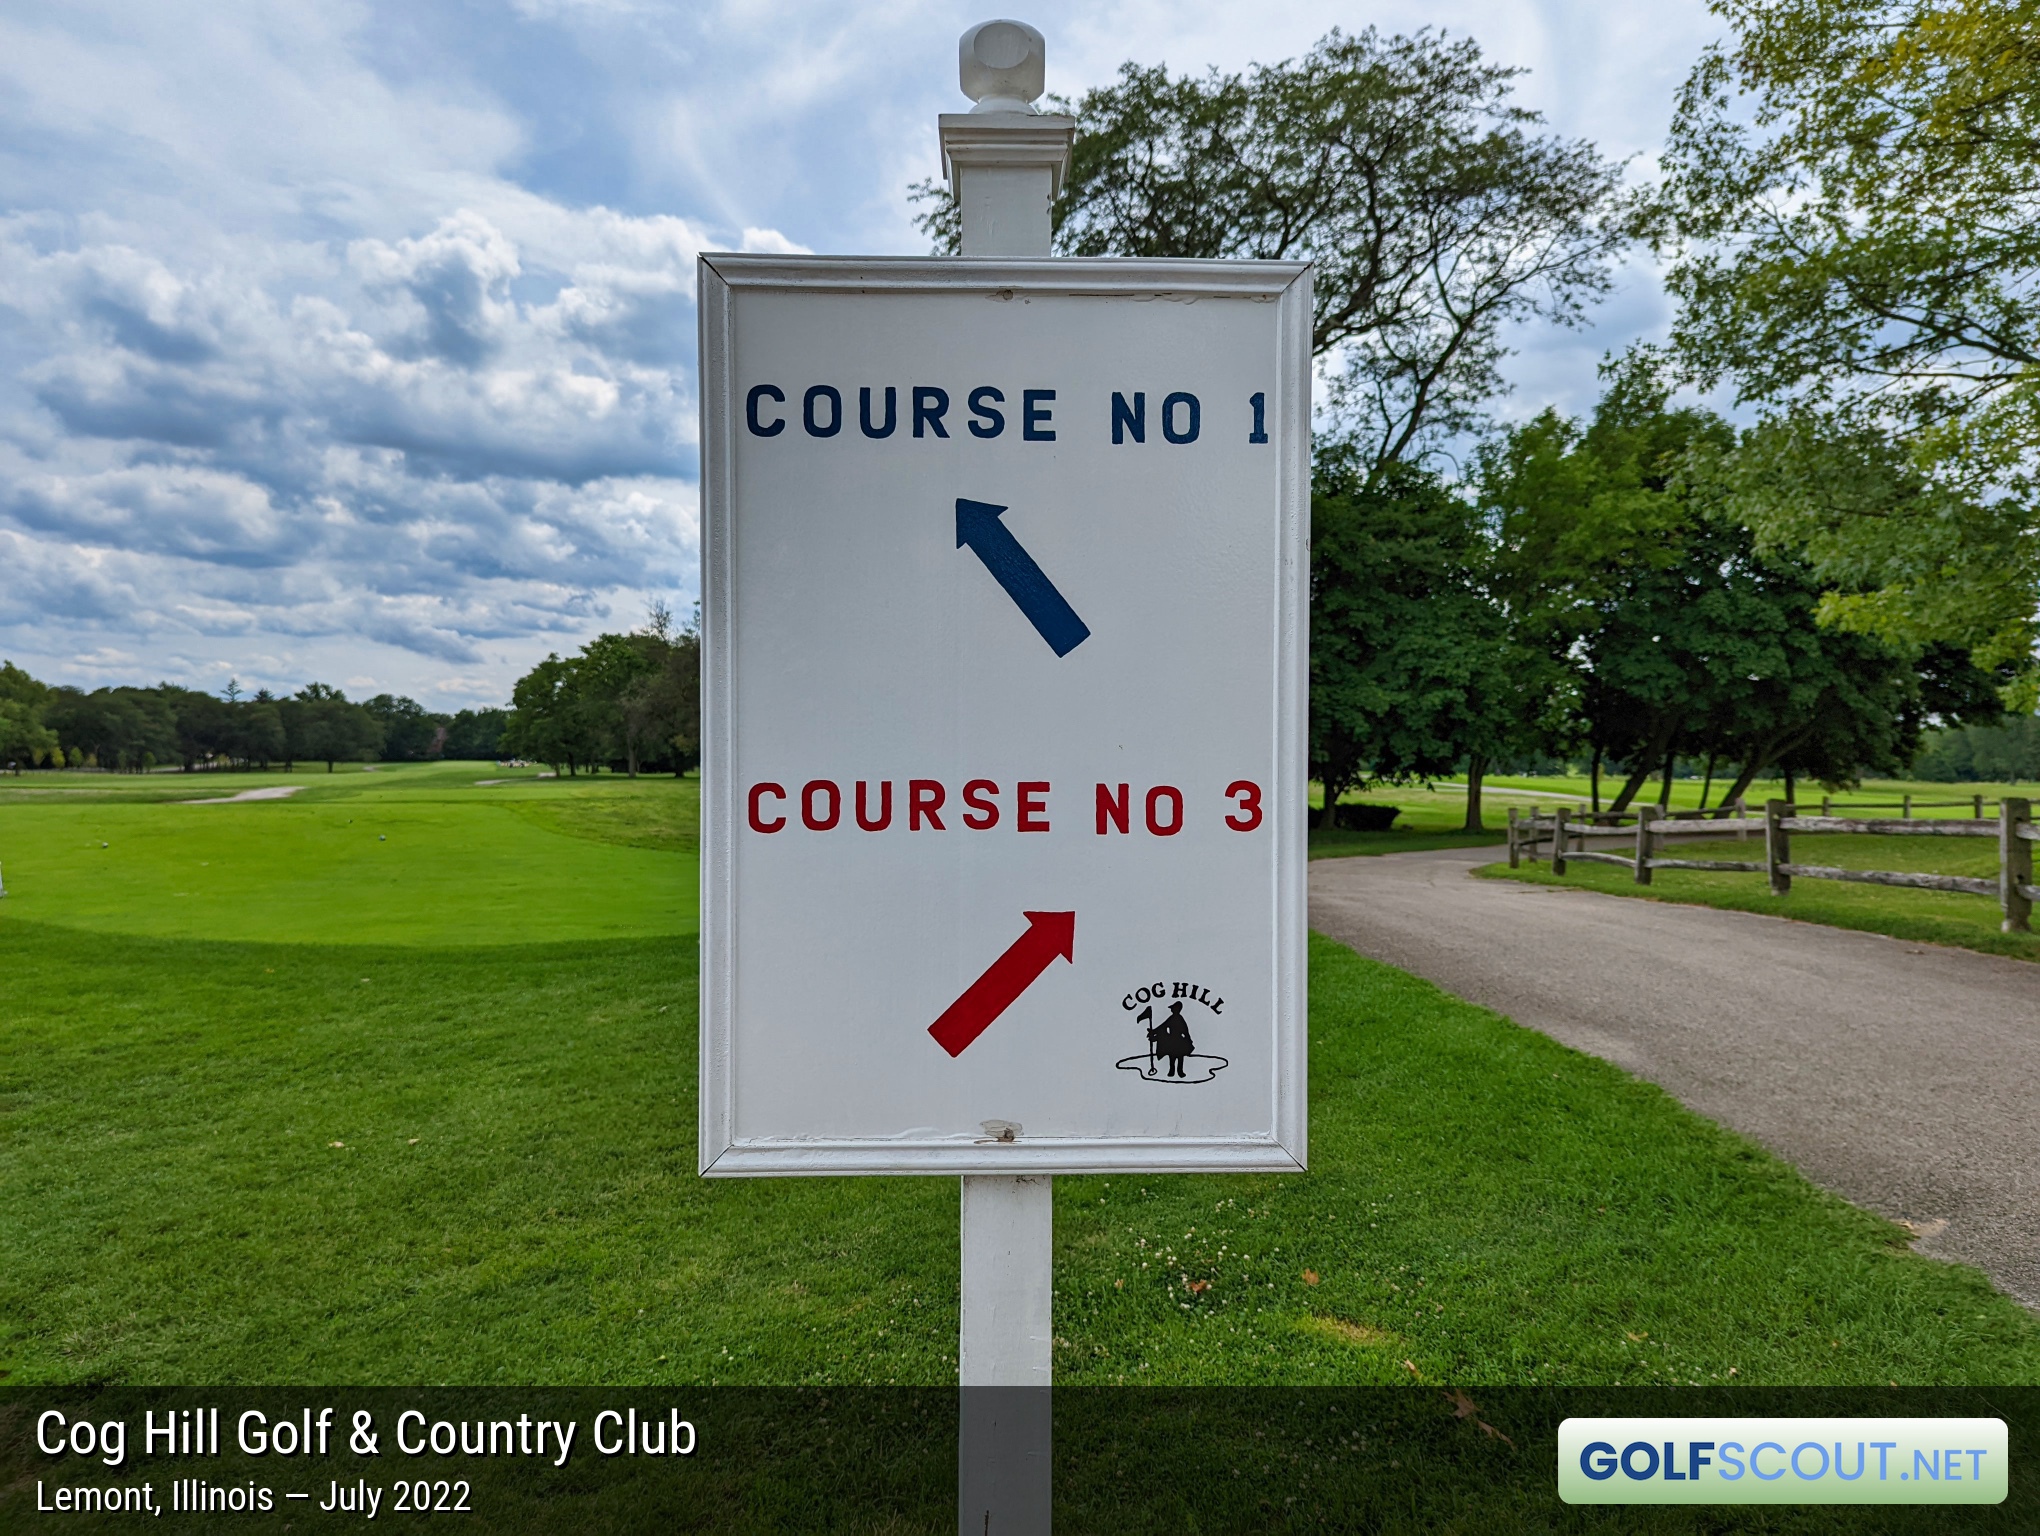 Miscellaneous photo of Cog Hill Course #1 in Palos Park, Illinois. Cog has smartly adopted a consistent color scheme for their courses. Course #1 always has blue signage, on course, in the scorecard, etc. Course #3 is red.